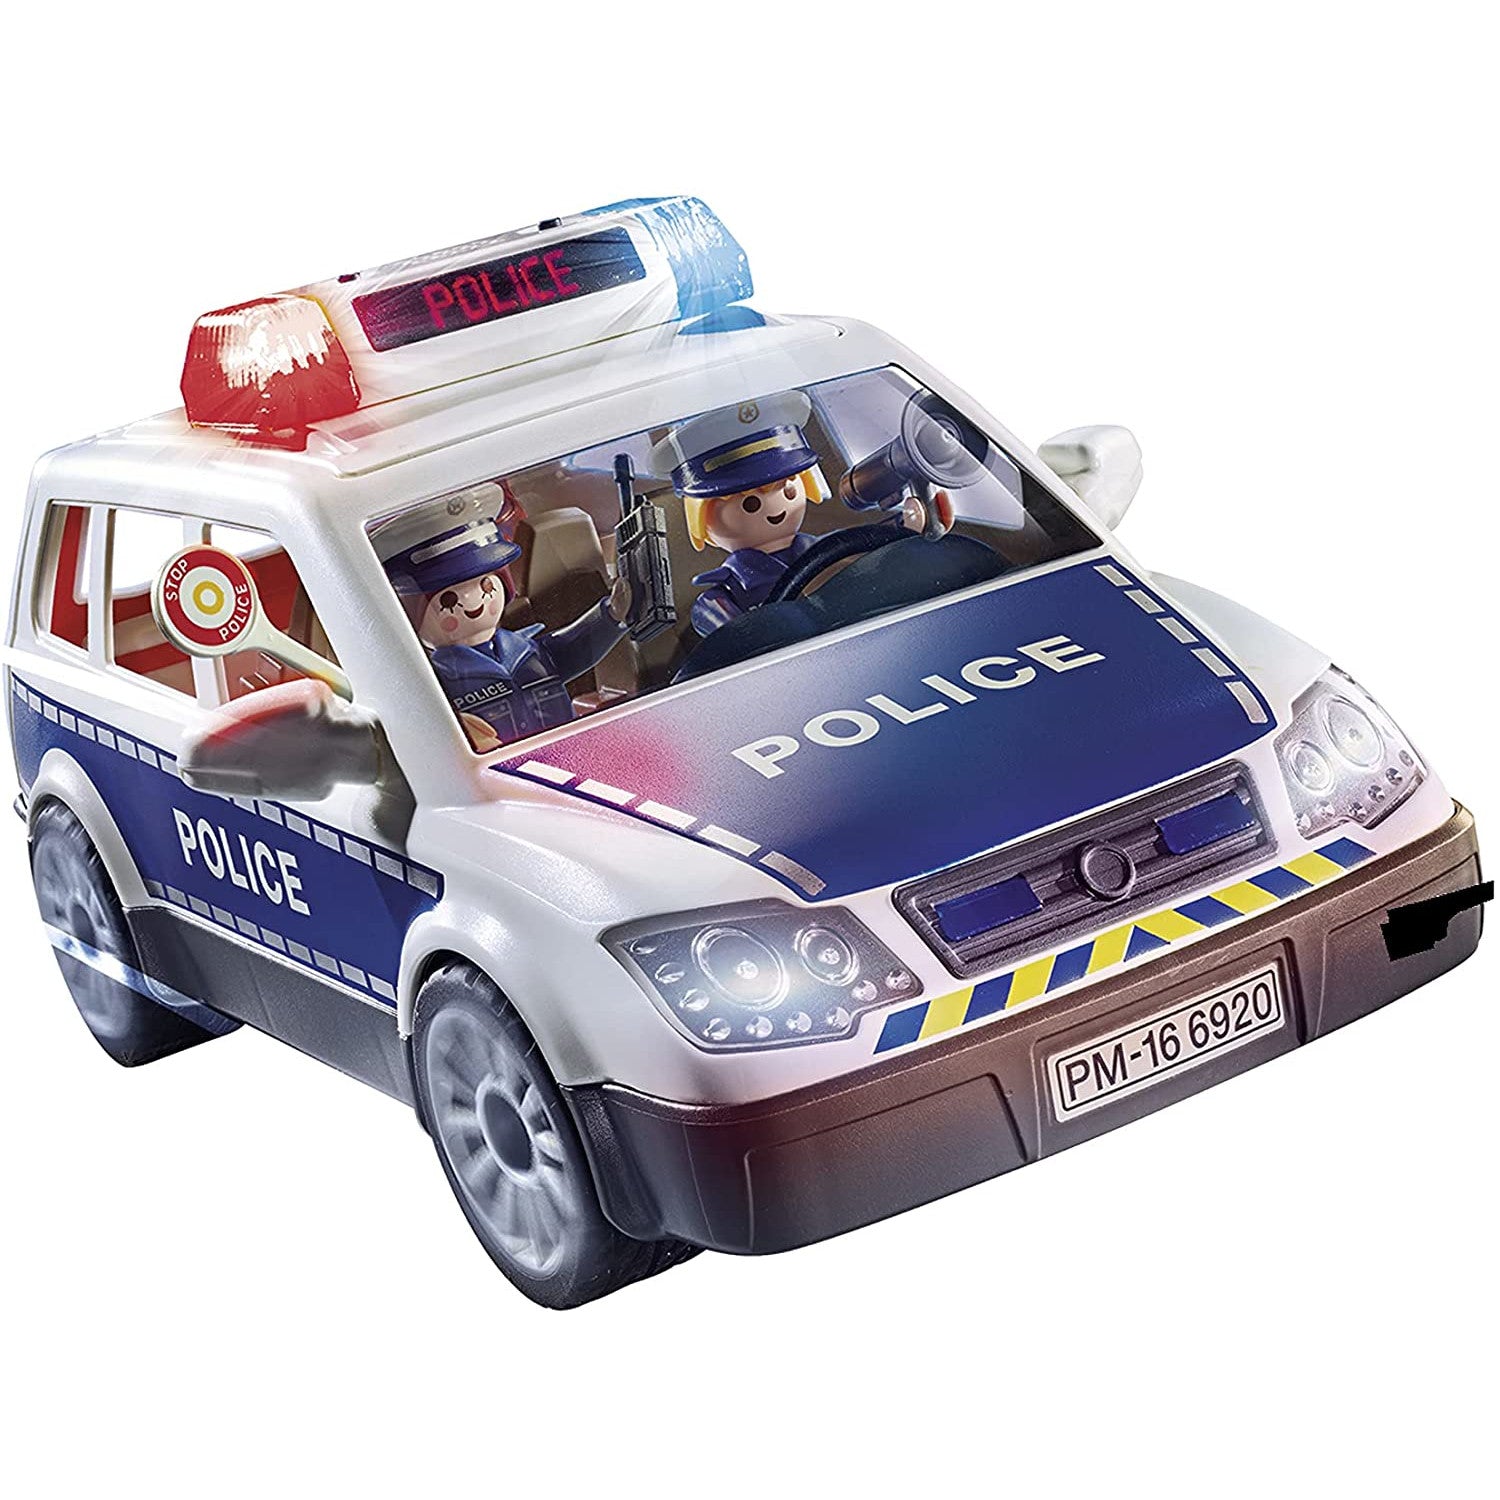 Police Car with Lights and Sound 6920 – K and K Creative